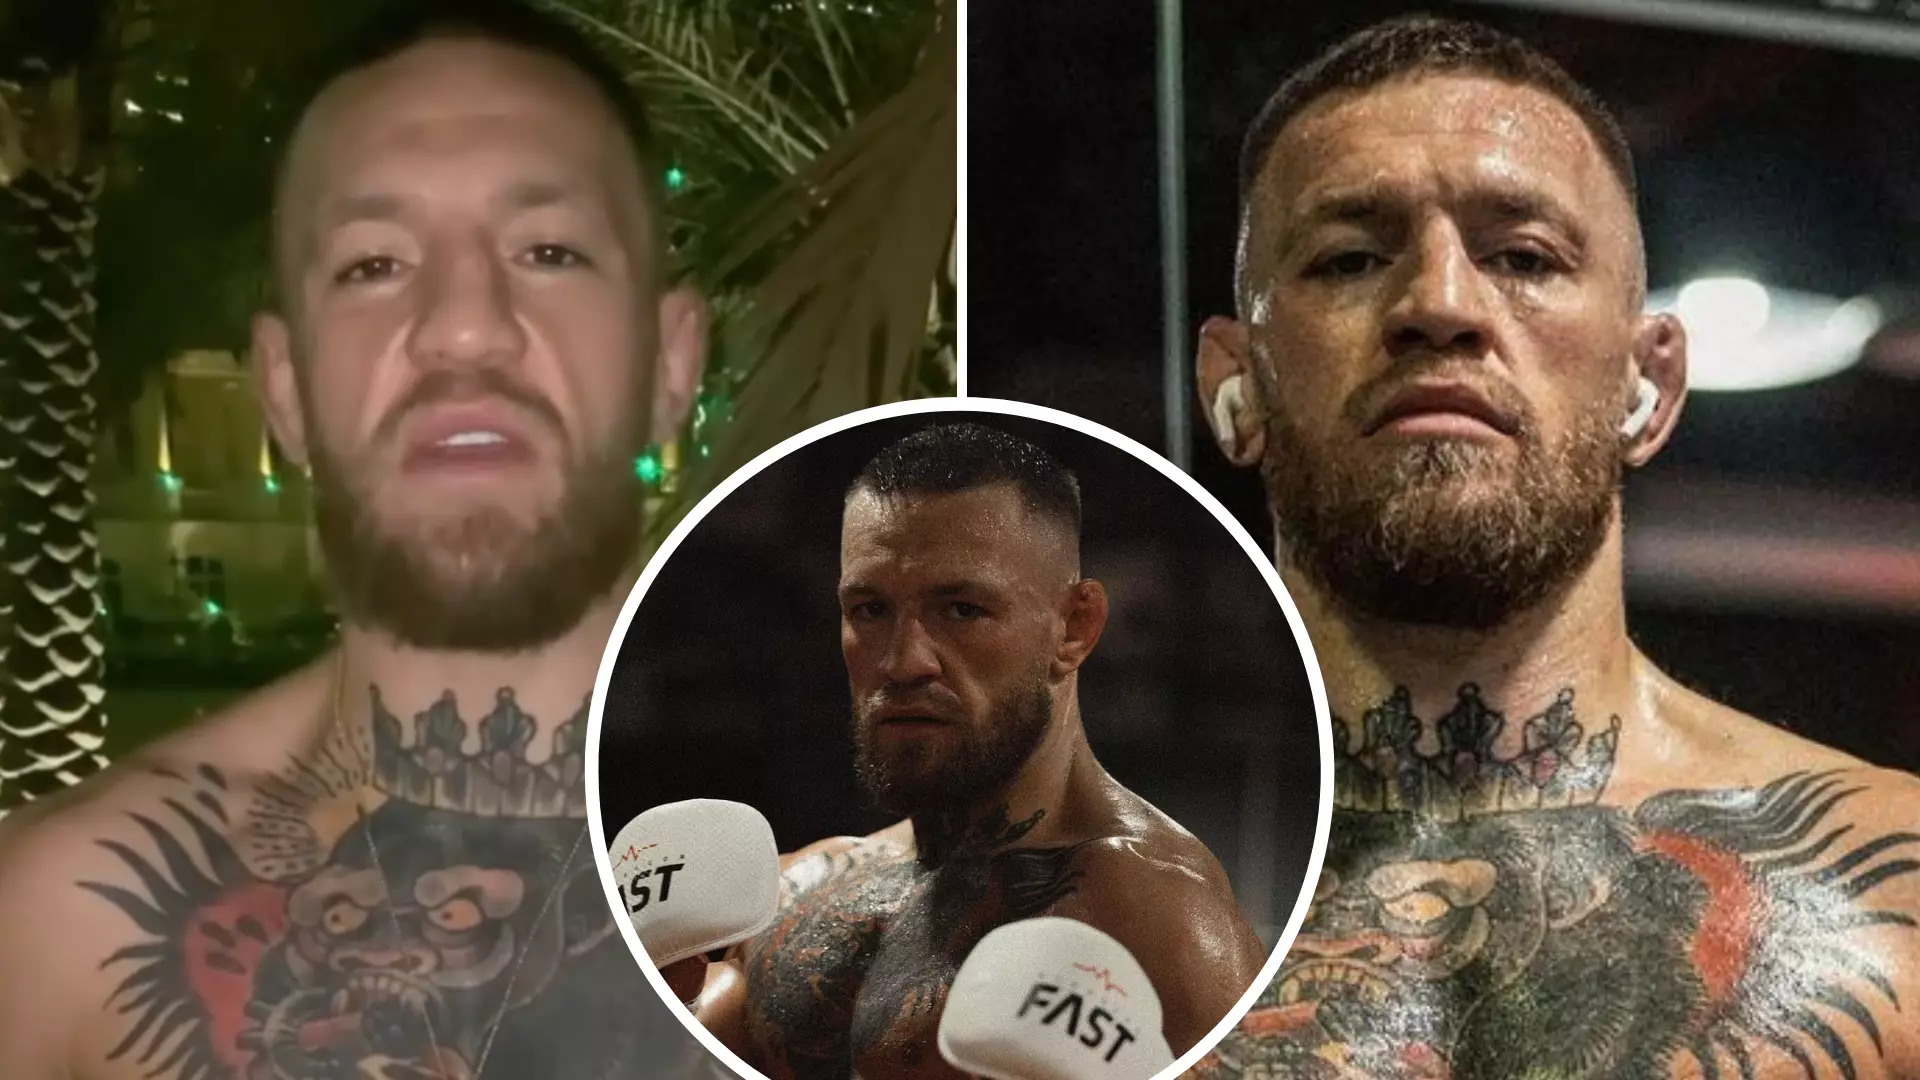 Conor McGregor Appears In 'Best Shape Of His Life' After Teasing Shredded Physique In New Training Snap